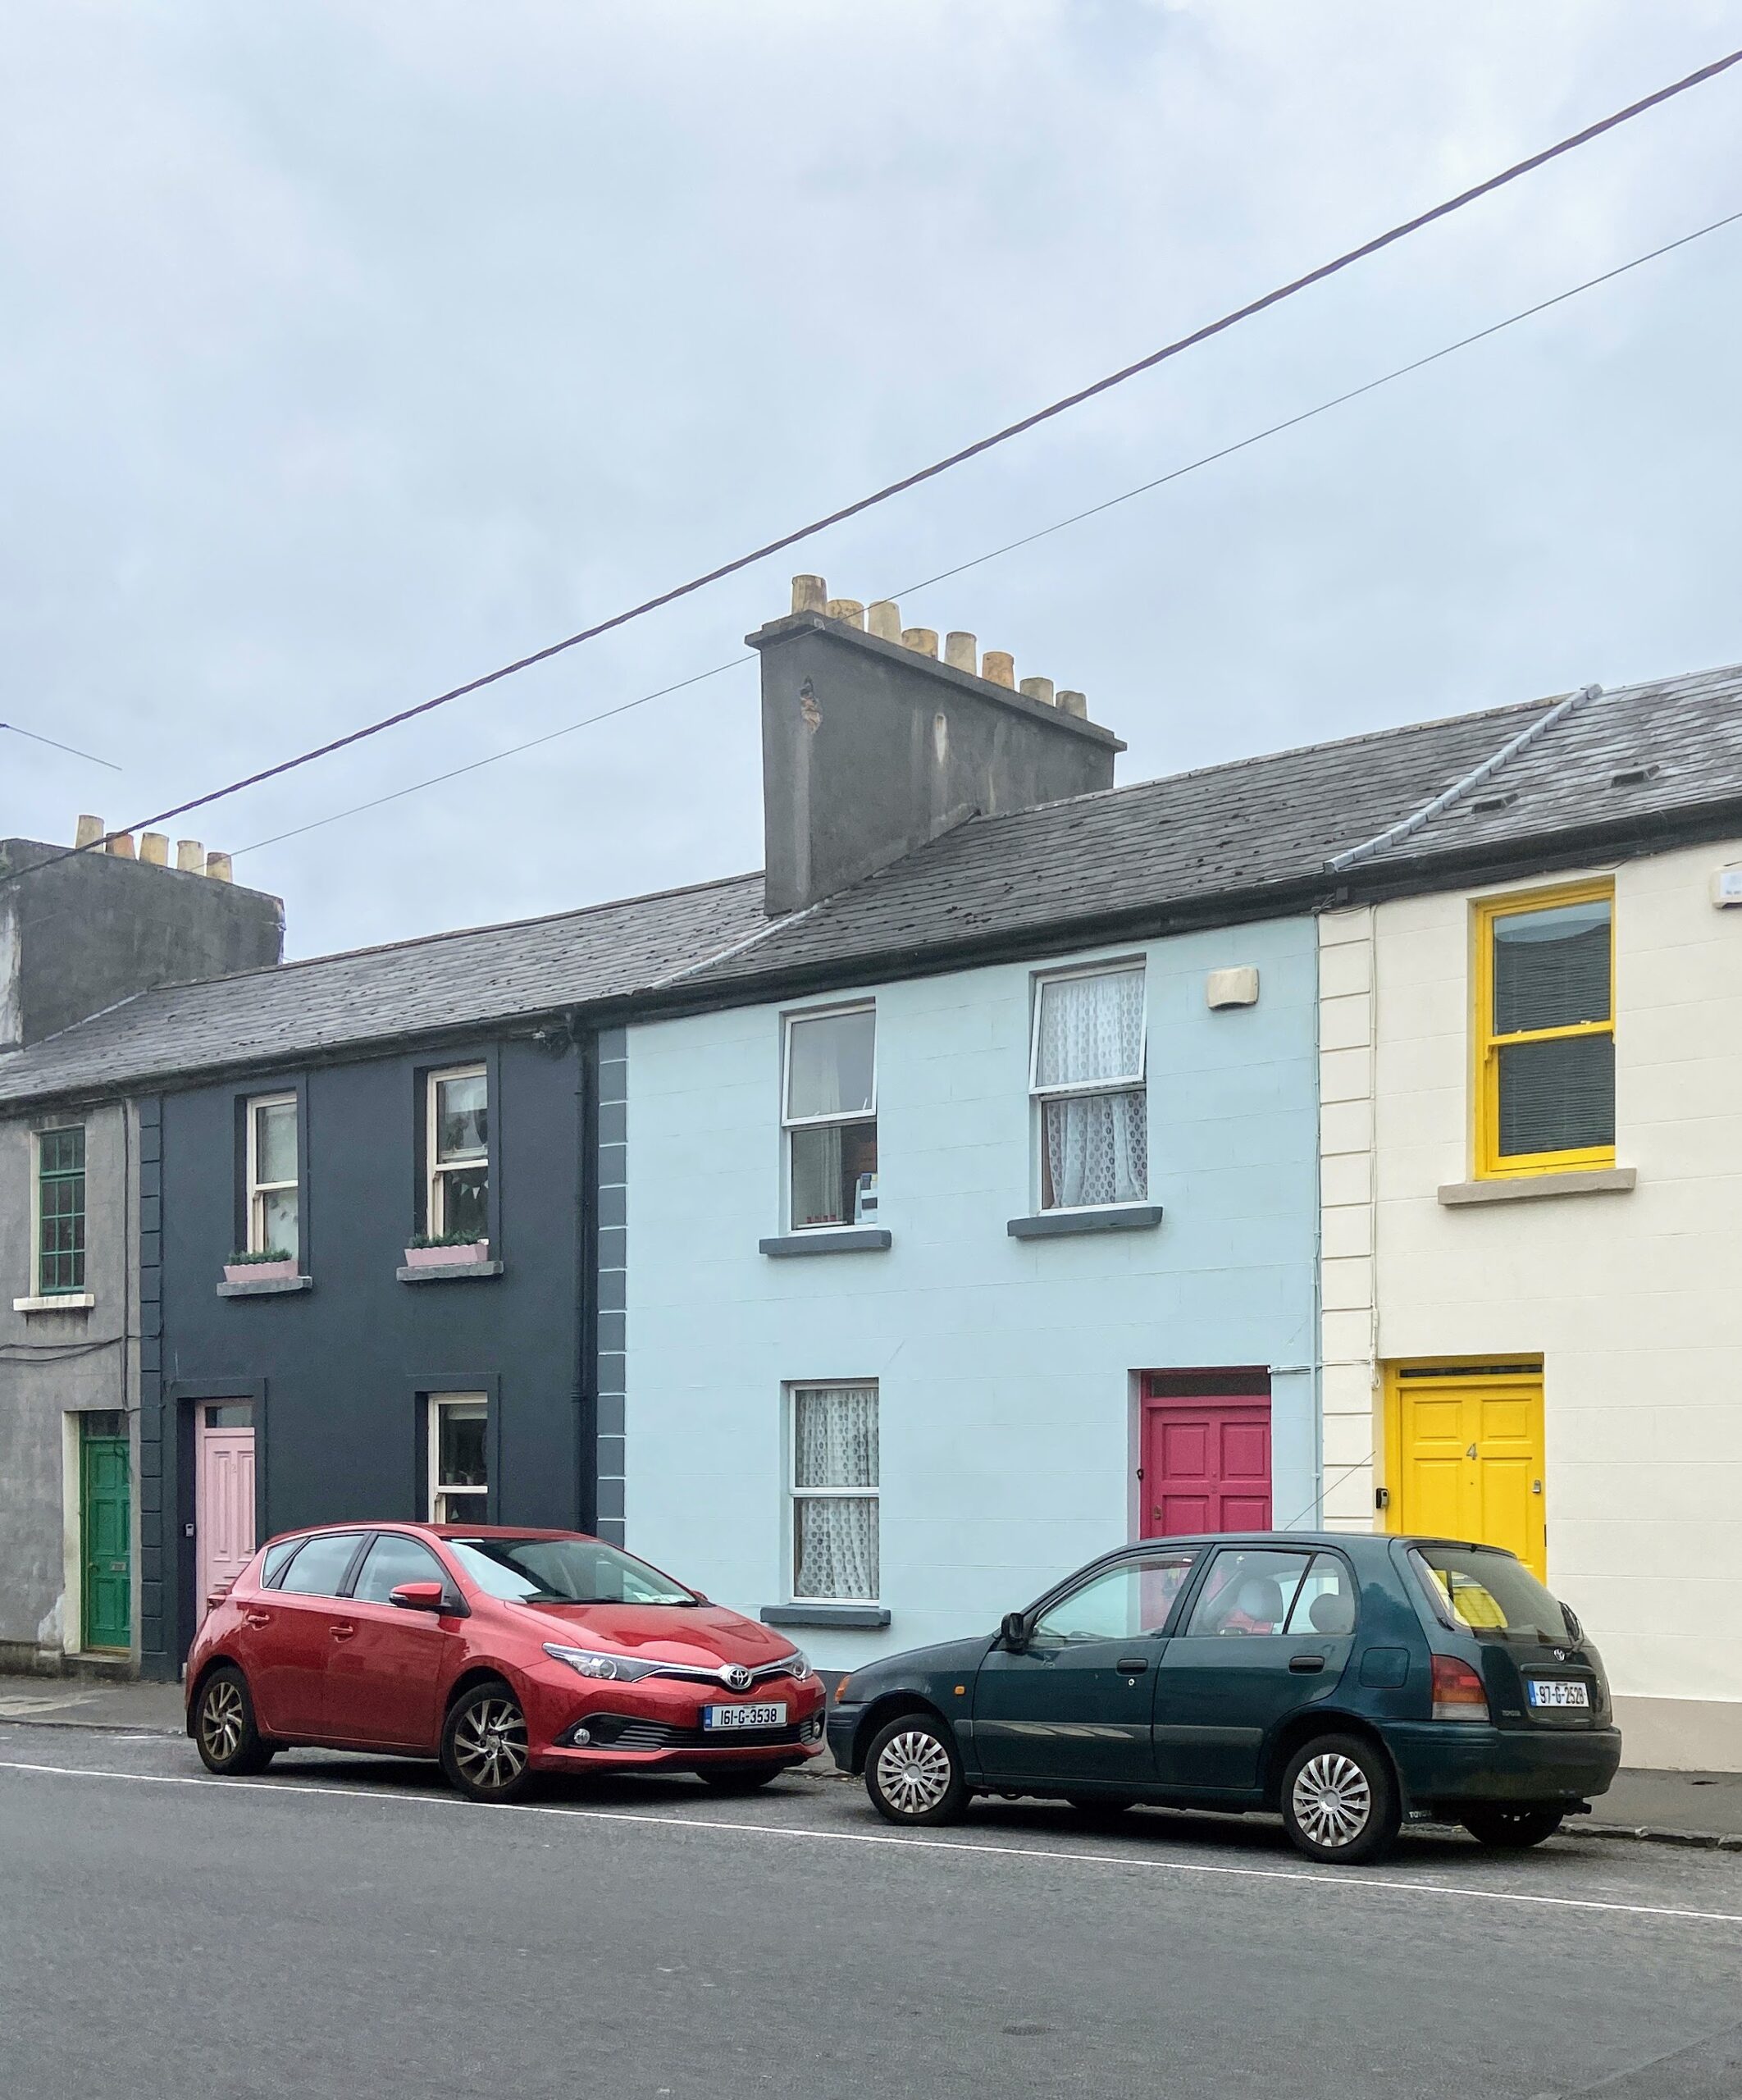 Two cars in Ireland